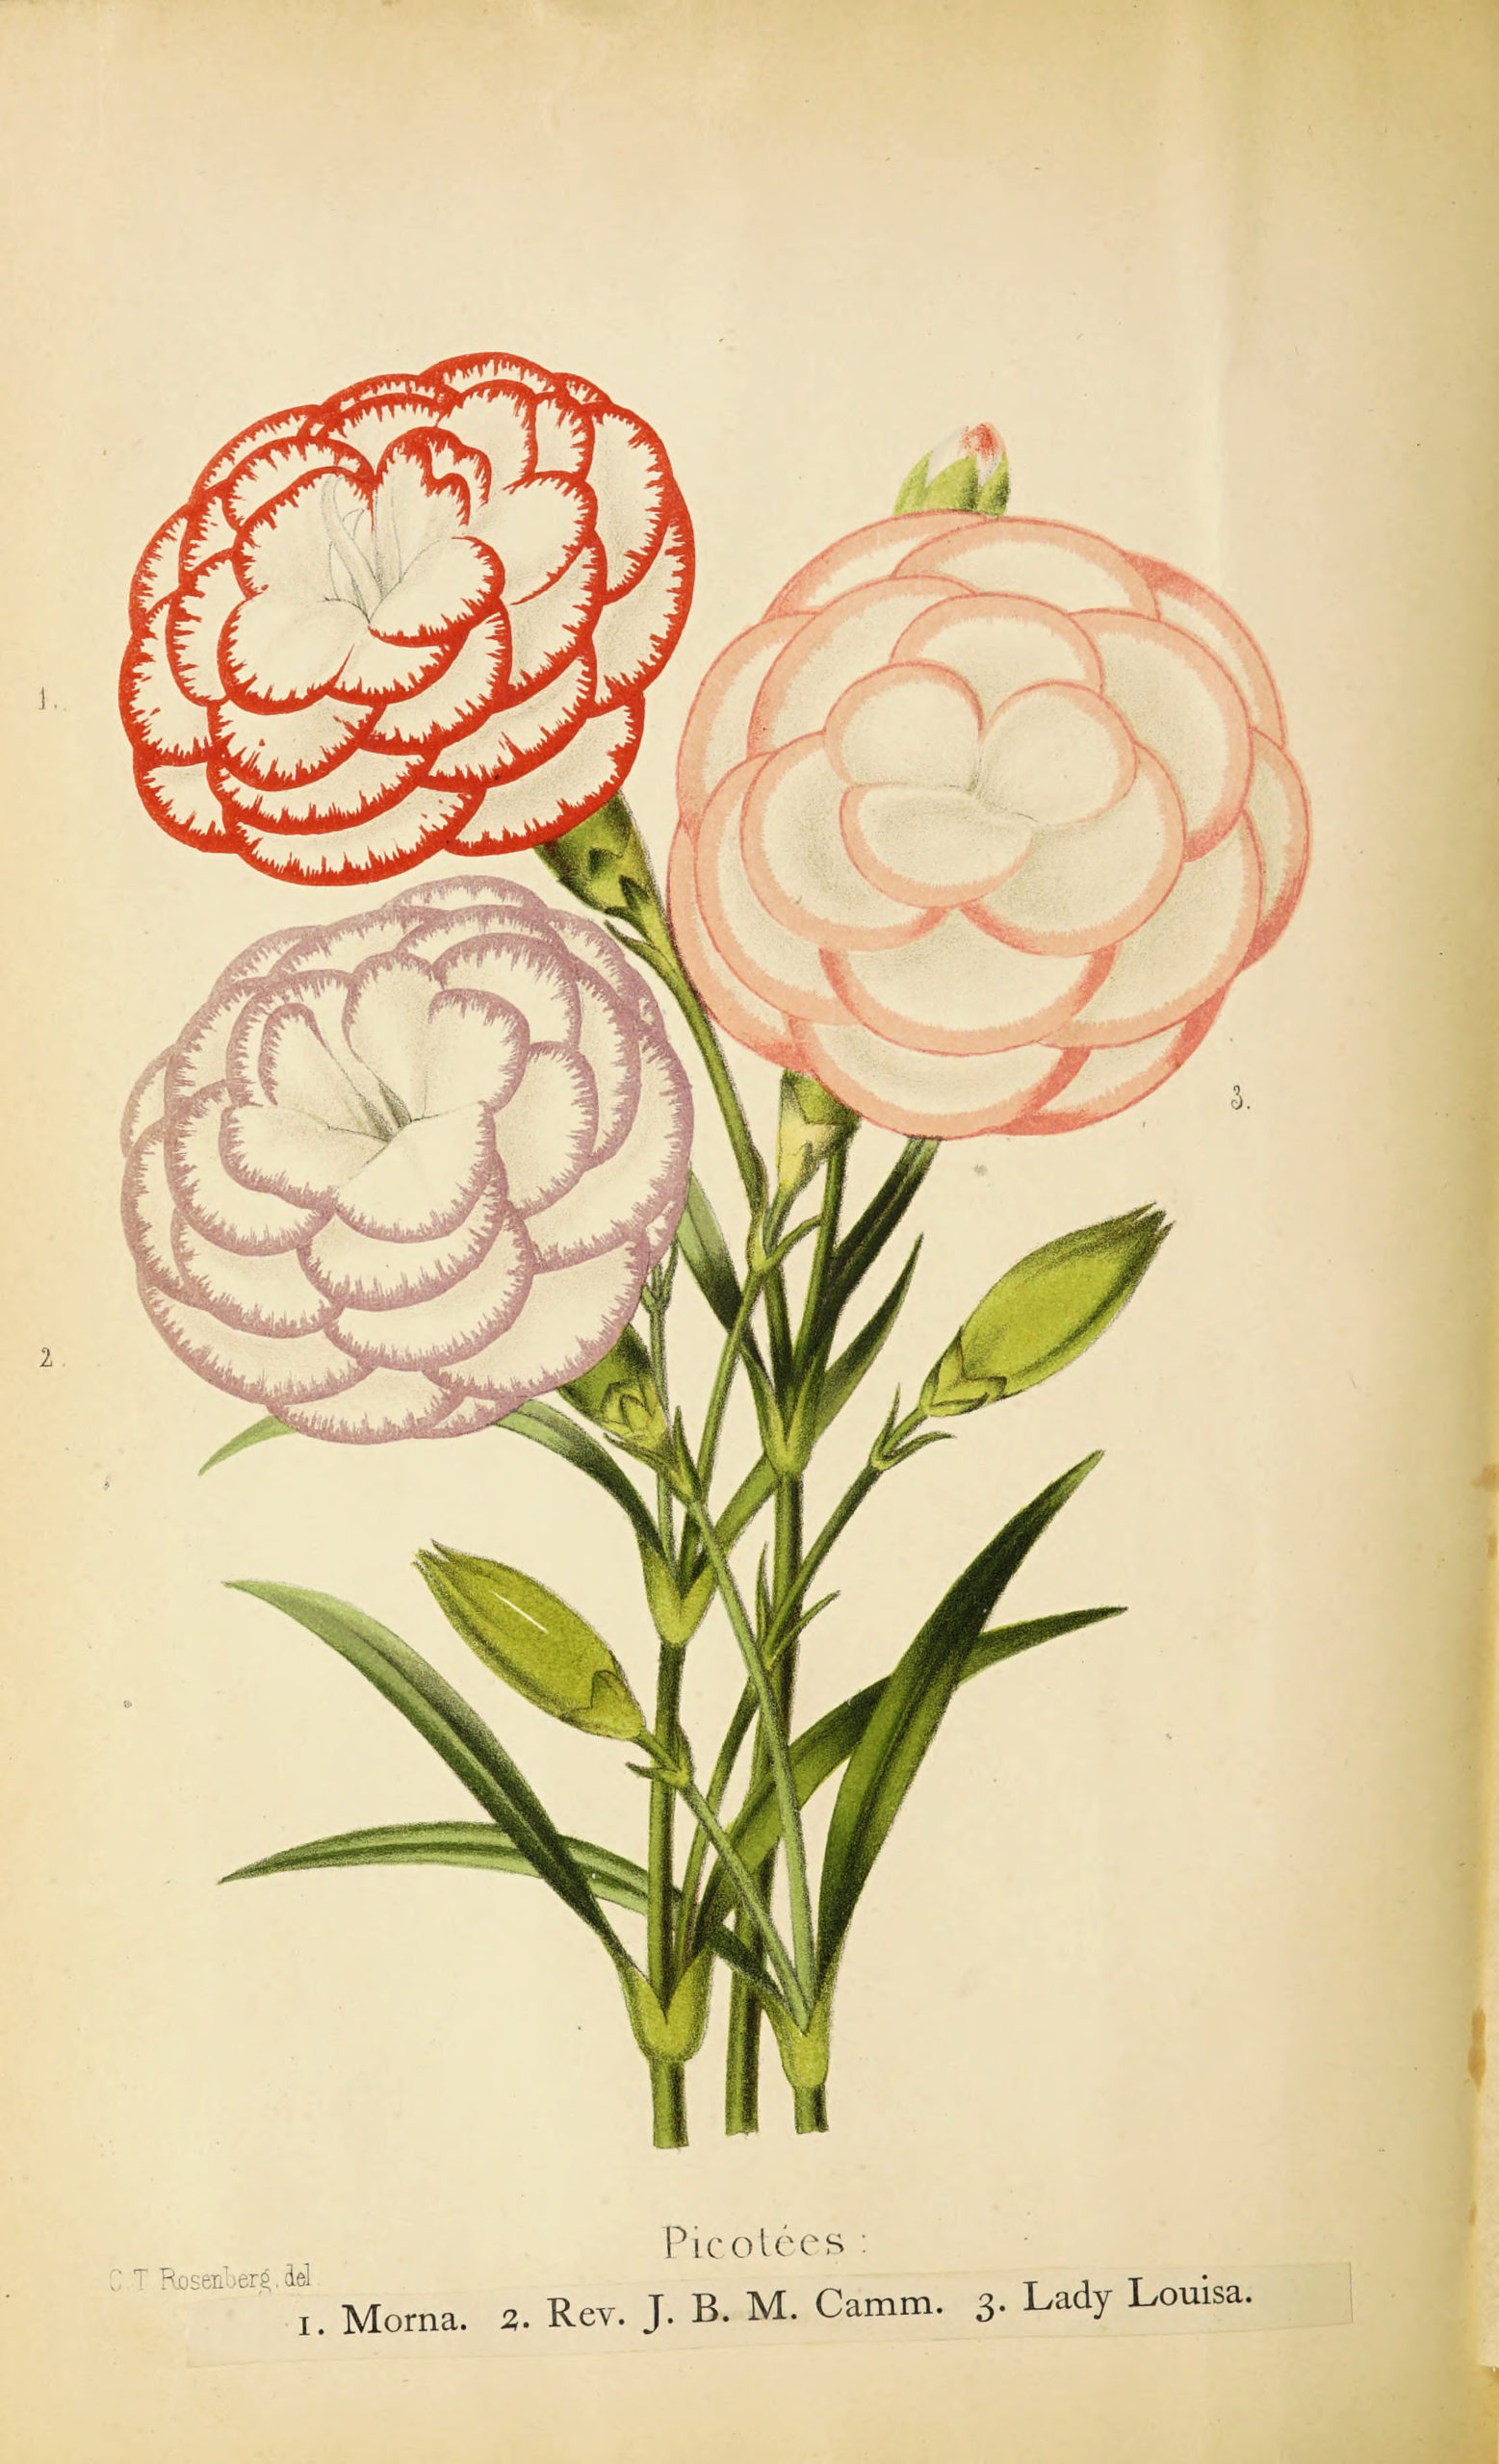 Vintage Botanical Prints - 72 in a series - New Picotees from The florist and pomologist (1879)